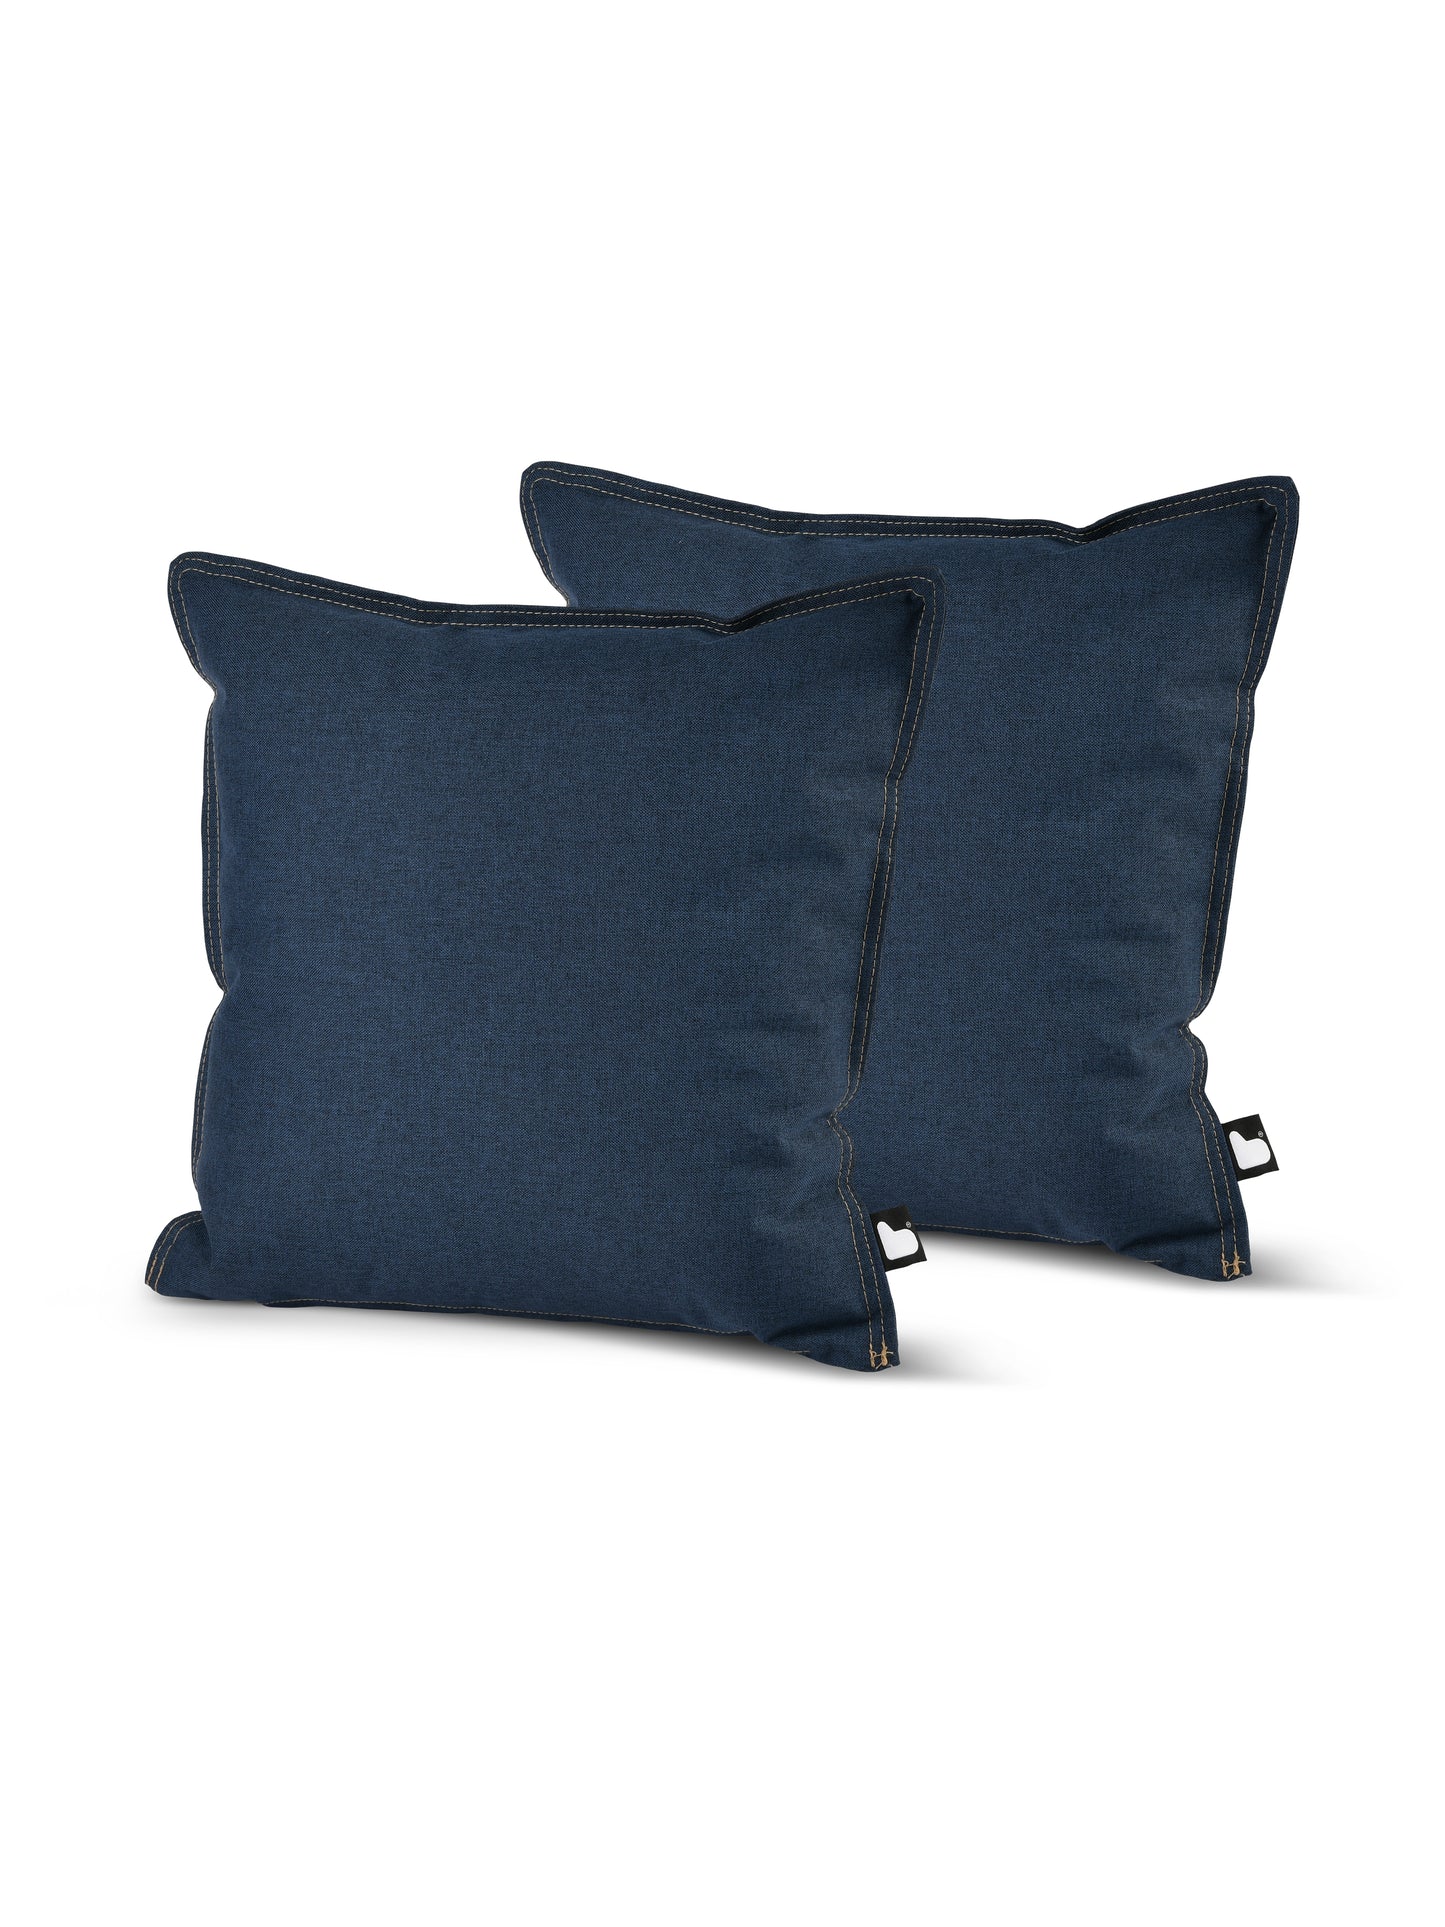 Two square, dark blue pillows with slightly curved corners are displayed against a white background. The Brisks B Cushion Twin Pack Denim Collection boasts UV-resistant and splash-proof fabric. They feature a visible black seam along the edges and a small fabric tag on each, indicating brand or product information.